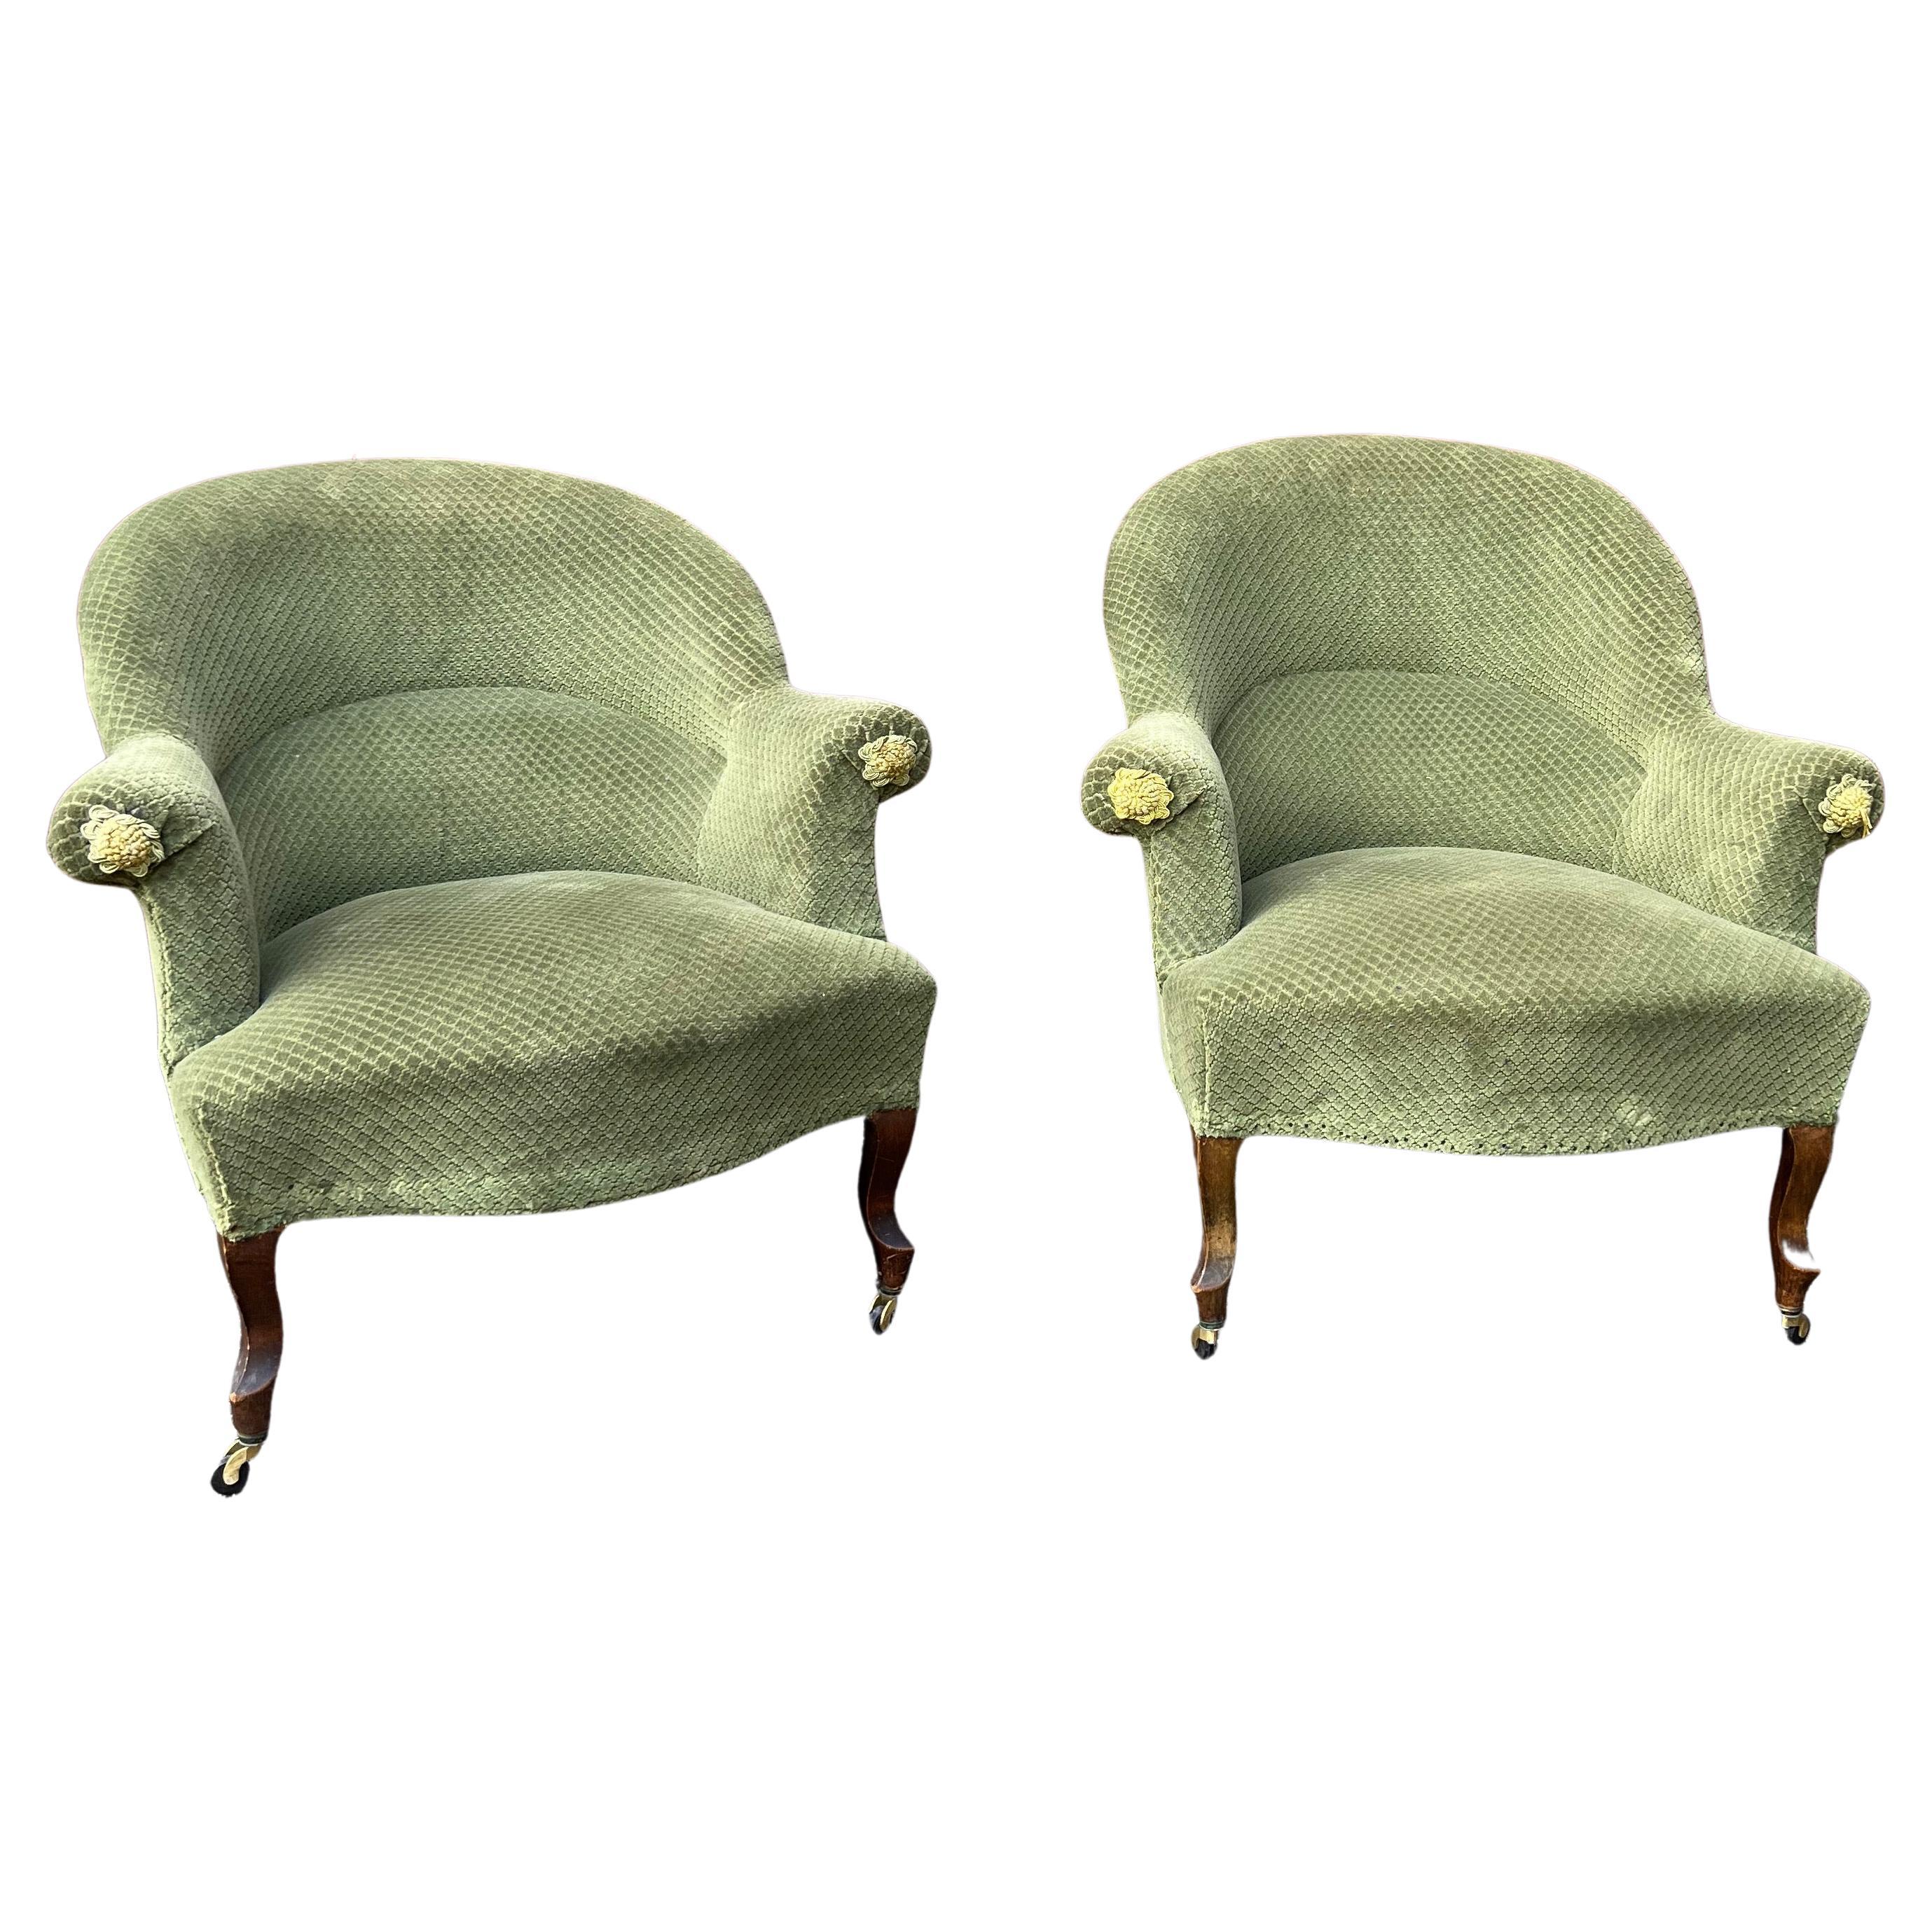 Pair of French Napoleon III Style Armchairs in Faded Green Velvet